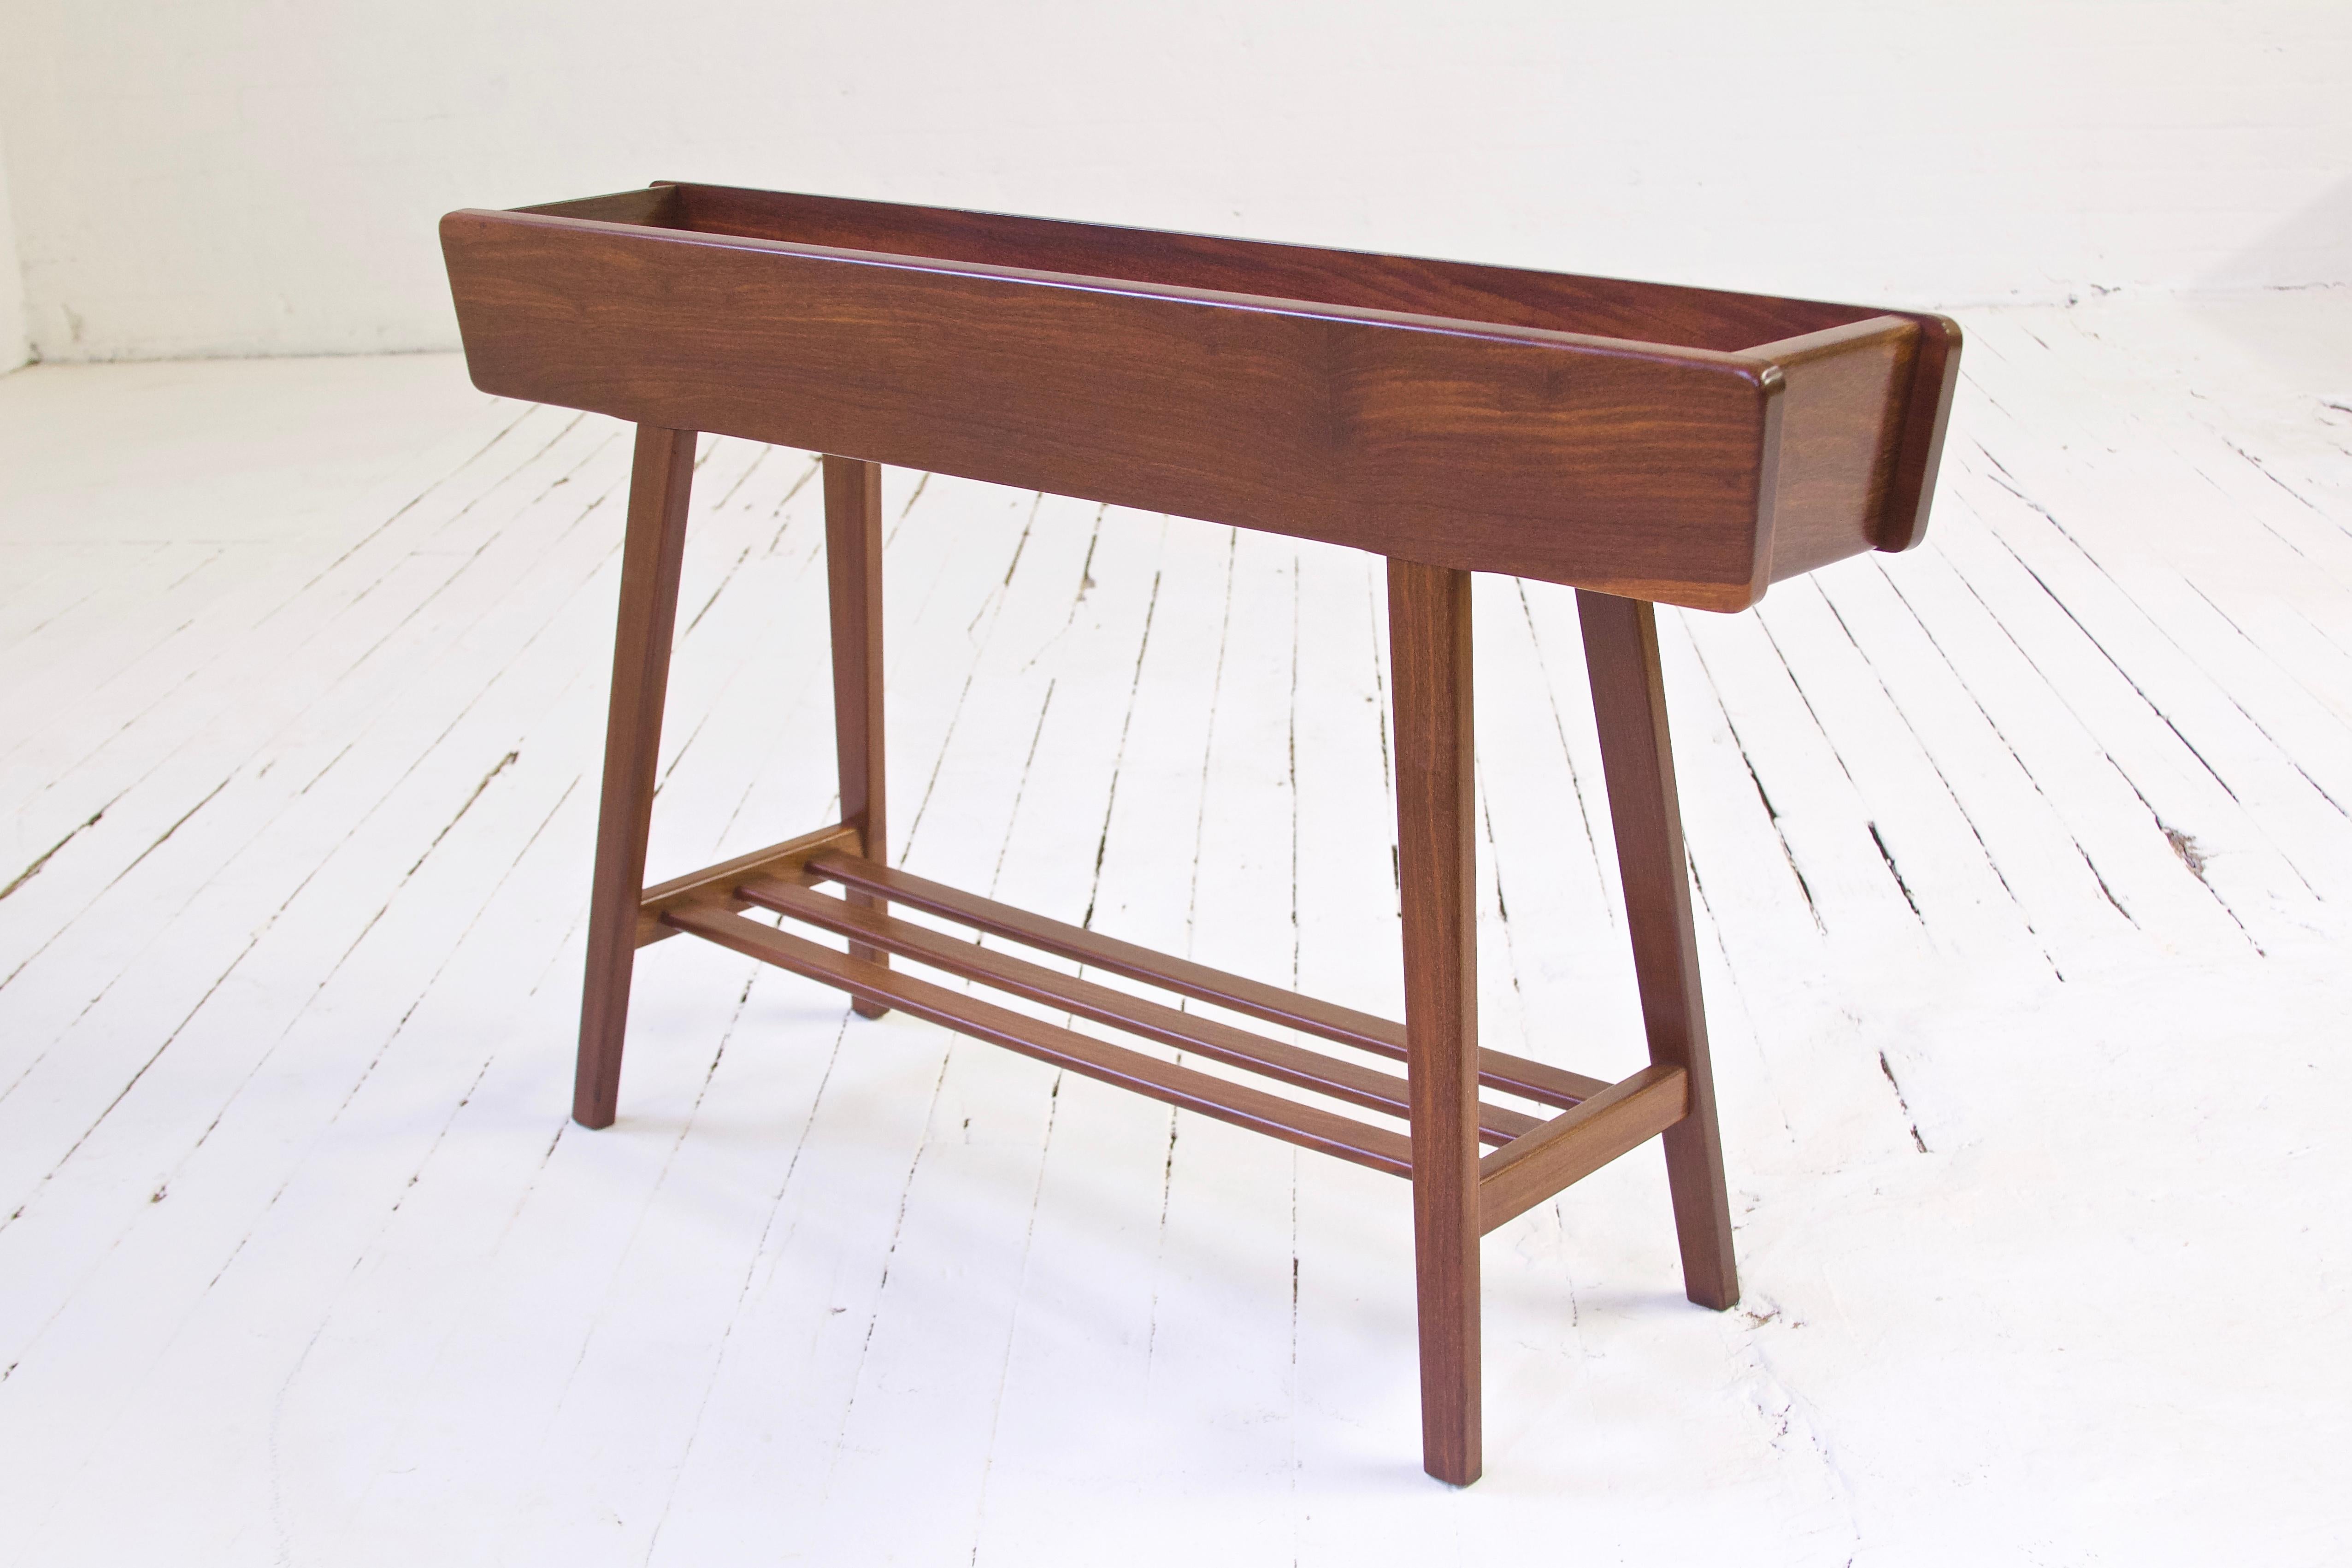 An attractive and incredibly well-preserved planter or jardinie`re in gorgeous old growth richly colored teak. Designed by BRDR Dalsgaard for Illums Bolighus, ca 1960. Splayed leg construction with three stretchers make this piece as strong as it is